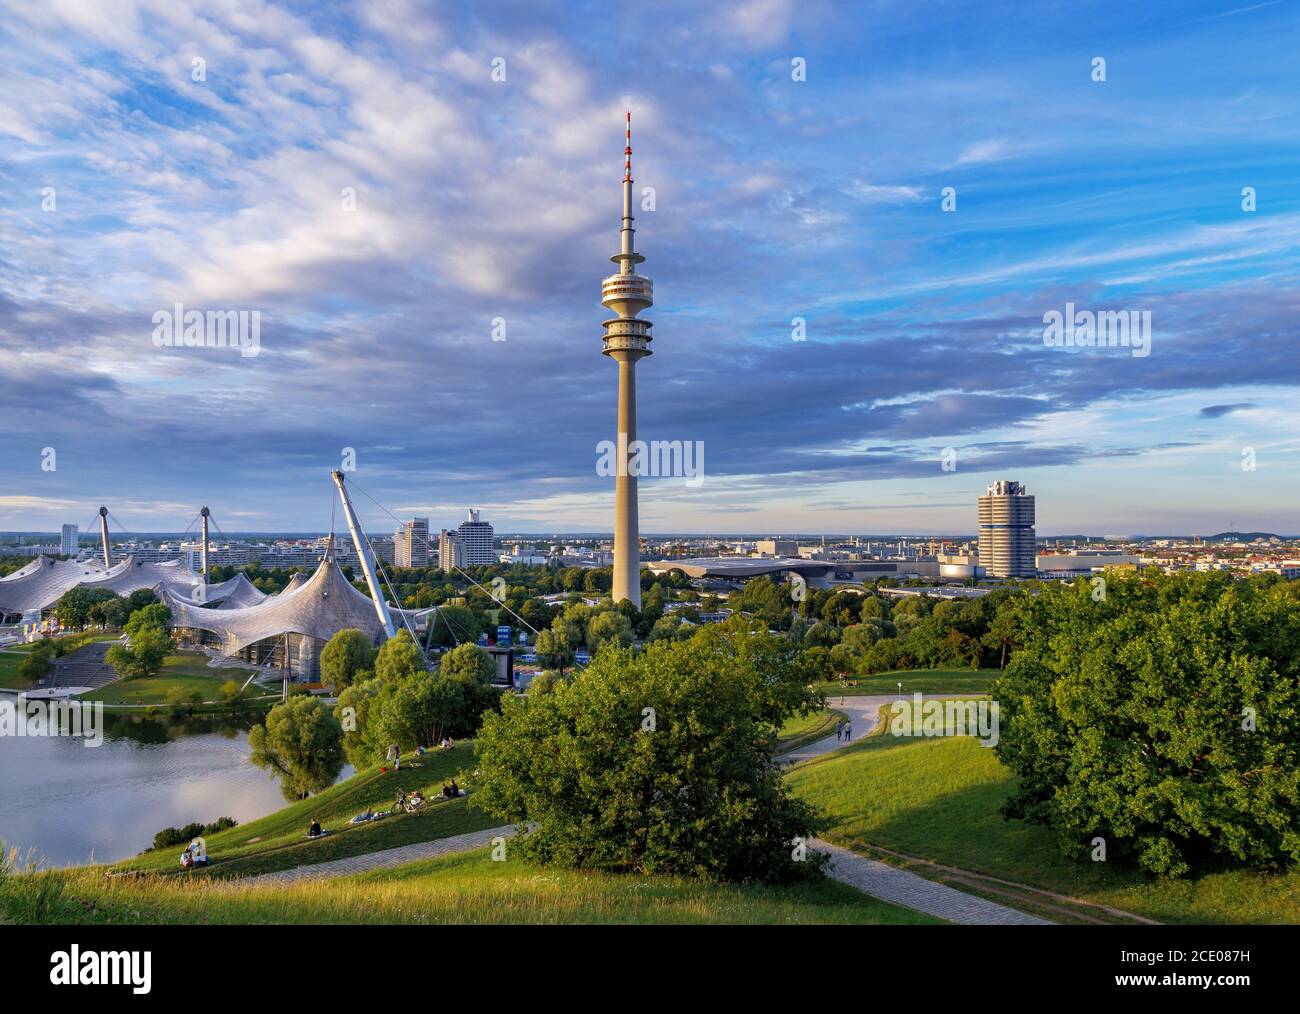 Olympic Area, park with olympic lake and television tower, Olympiaturm, Olympiapark, Munich, Upper Bavaria, Bavaria, Germany, Europe Stock Photo